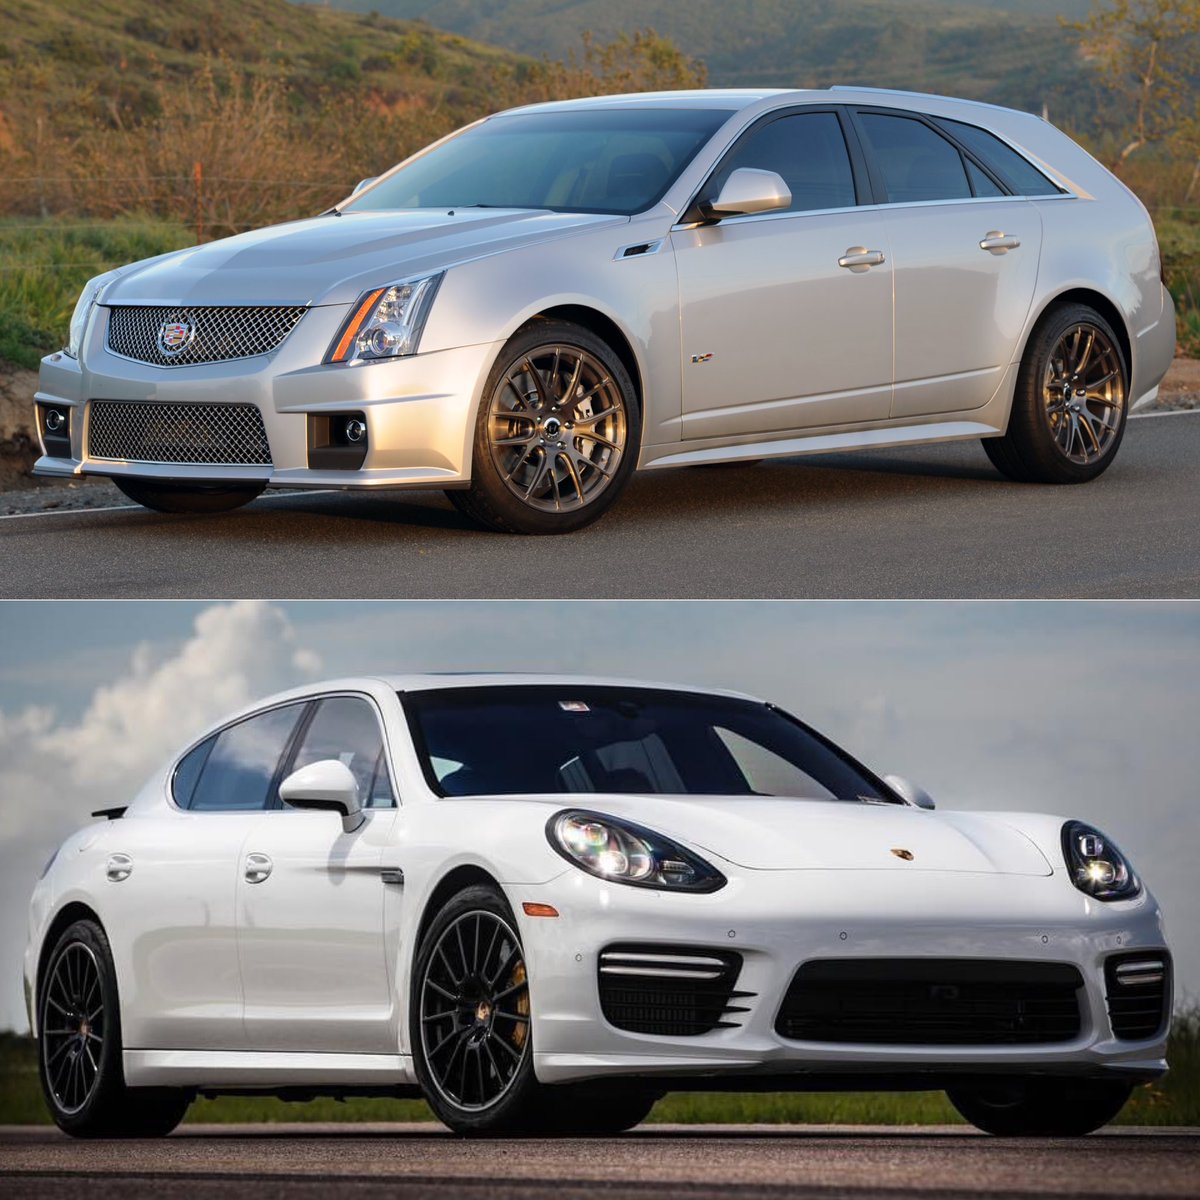 👉THIS or THAT 👈 CTS-V or Panamera Turbo 🏁

#Hennessey #Porsche #Cadillac #CTS #CTSv #Ct5v #CadillacCTSv #CadillacVseries #PanameraTurbo #Turbo #TurboS #PorschePanamera #Wagon #LongMayWeDrive #Pennzoil #ThisorThat